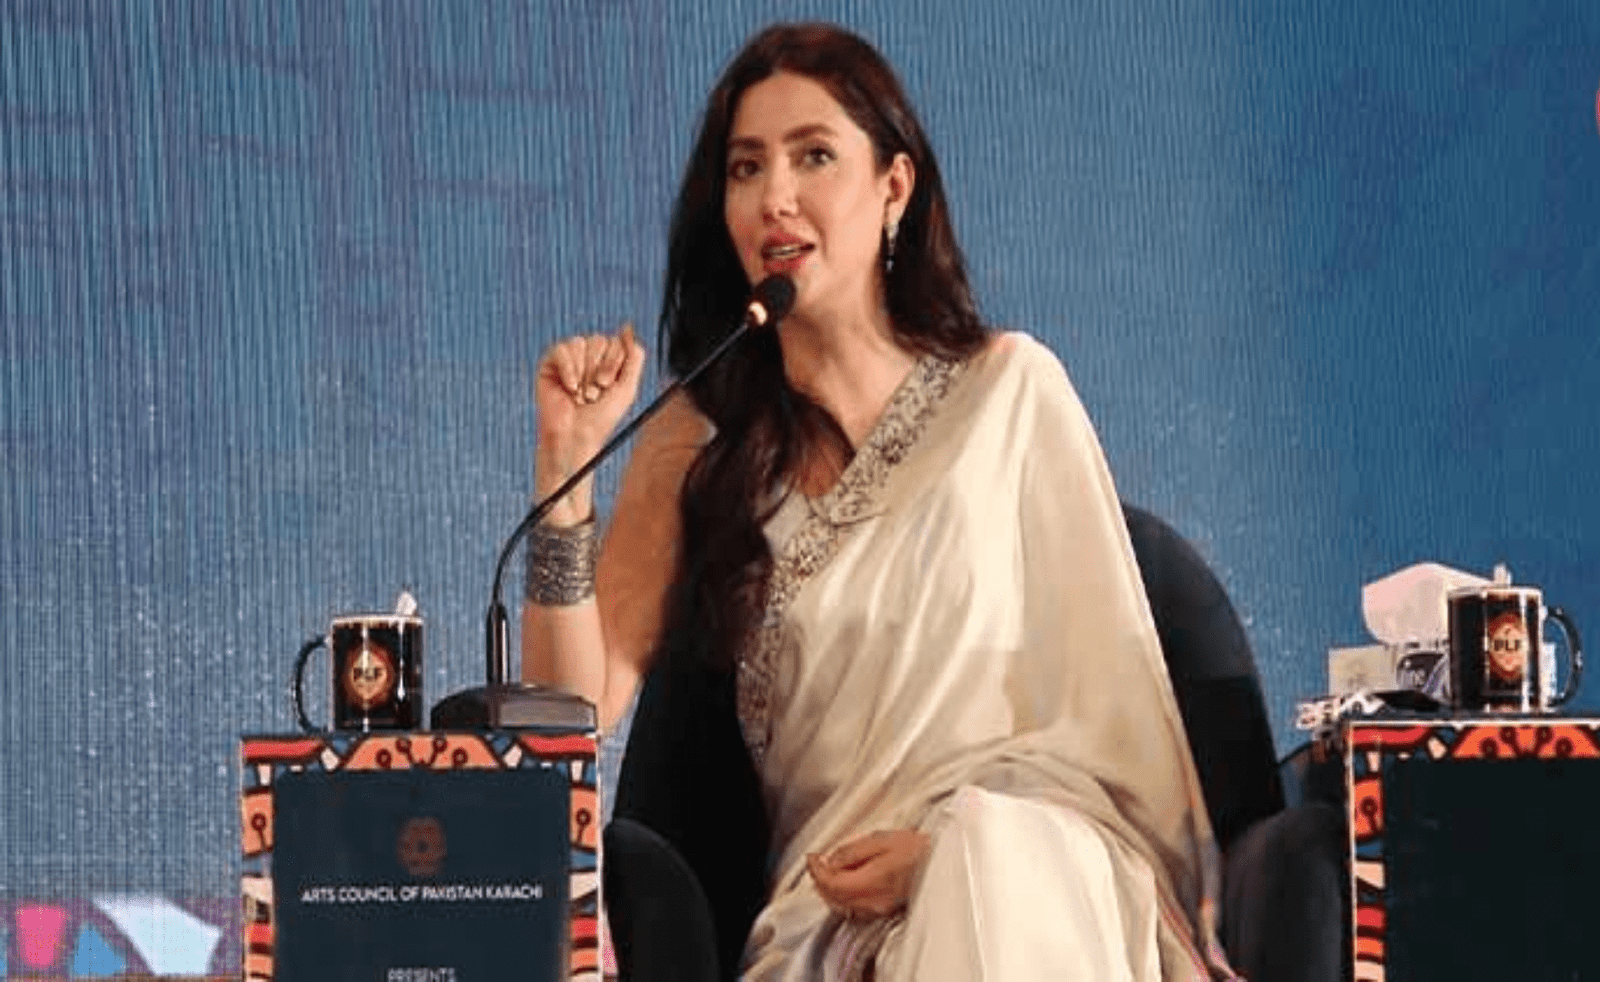 ‘It’s unacceptable’: Mahira Khan reacts after person throws things at her on PLF stage